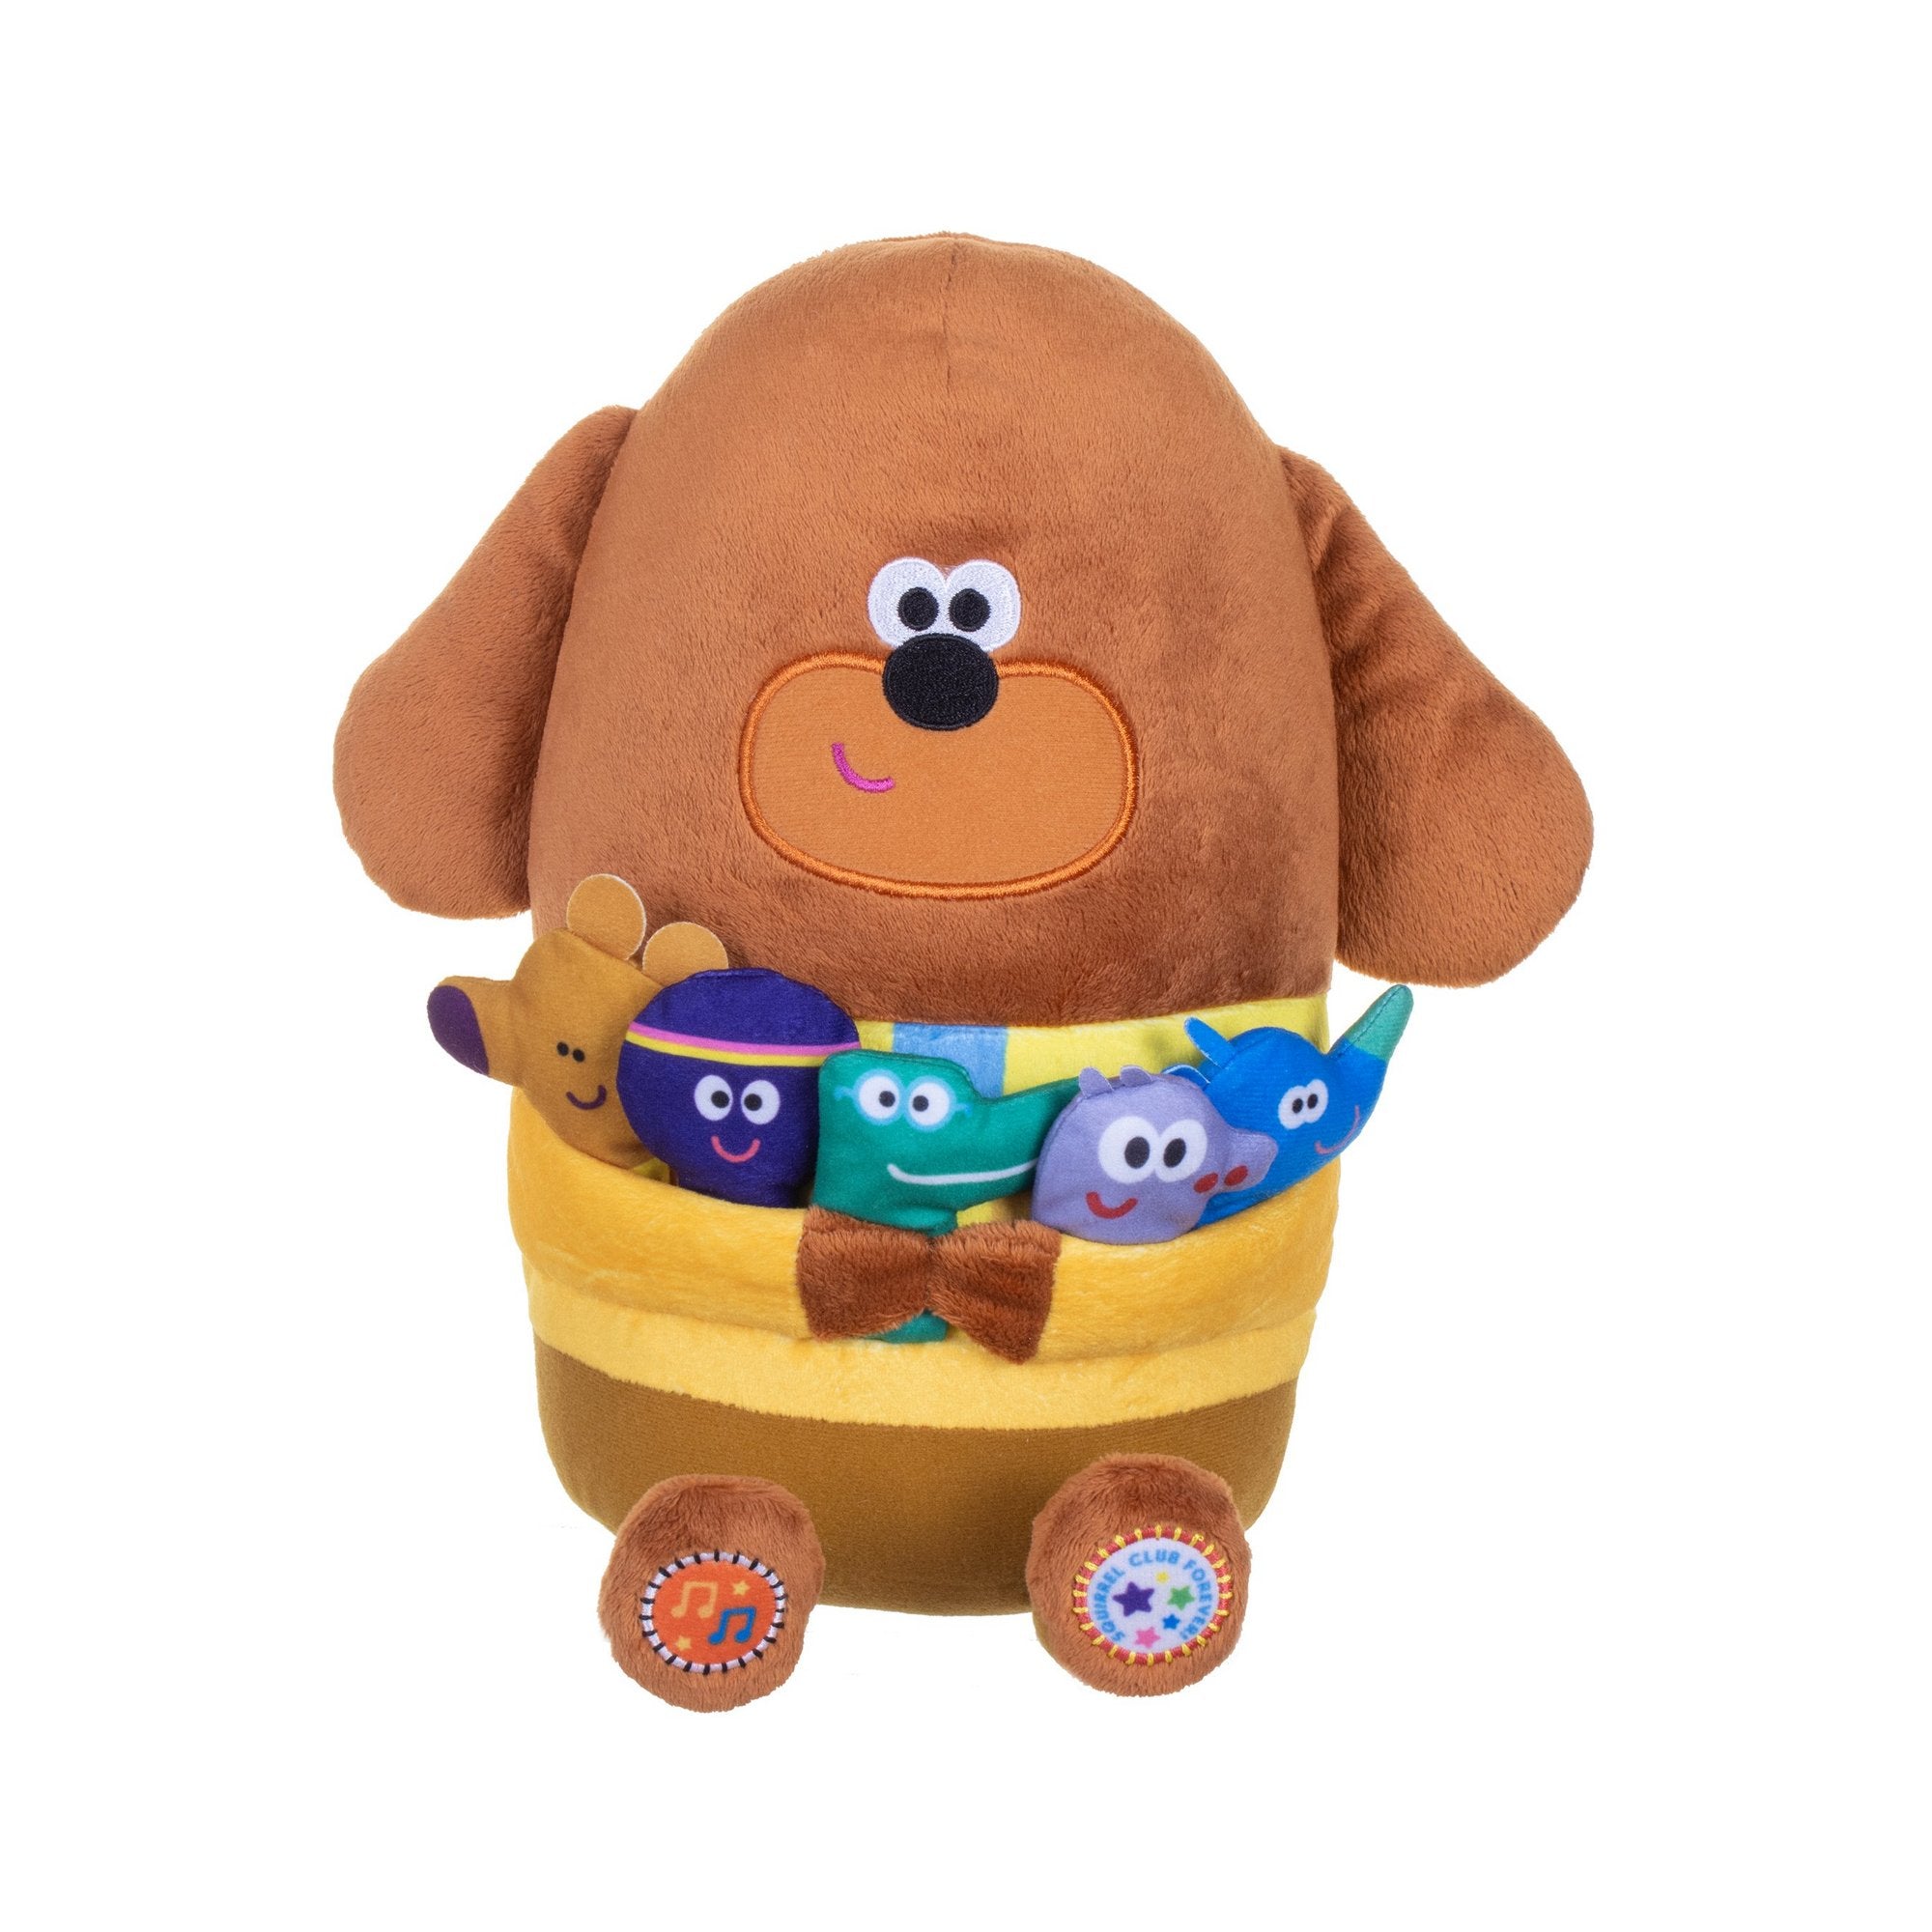 Hey Duggee Music & Storytime Squirrels Soft Plush Toy }440g 2149